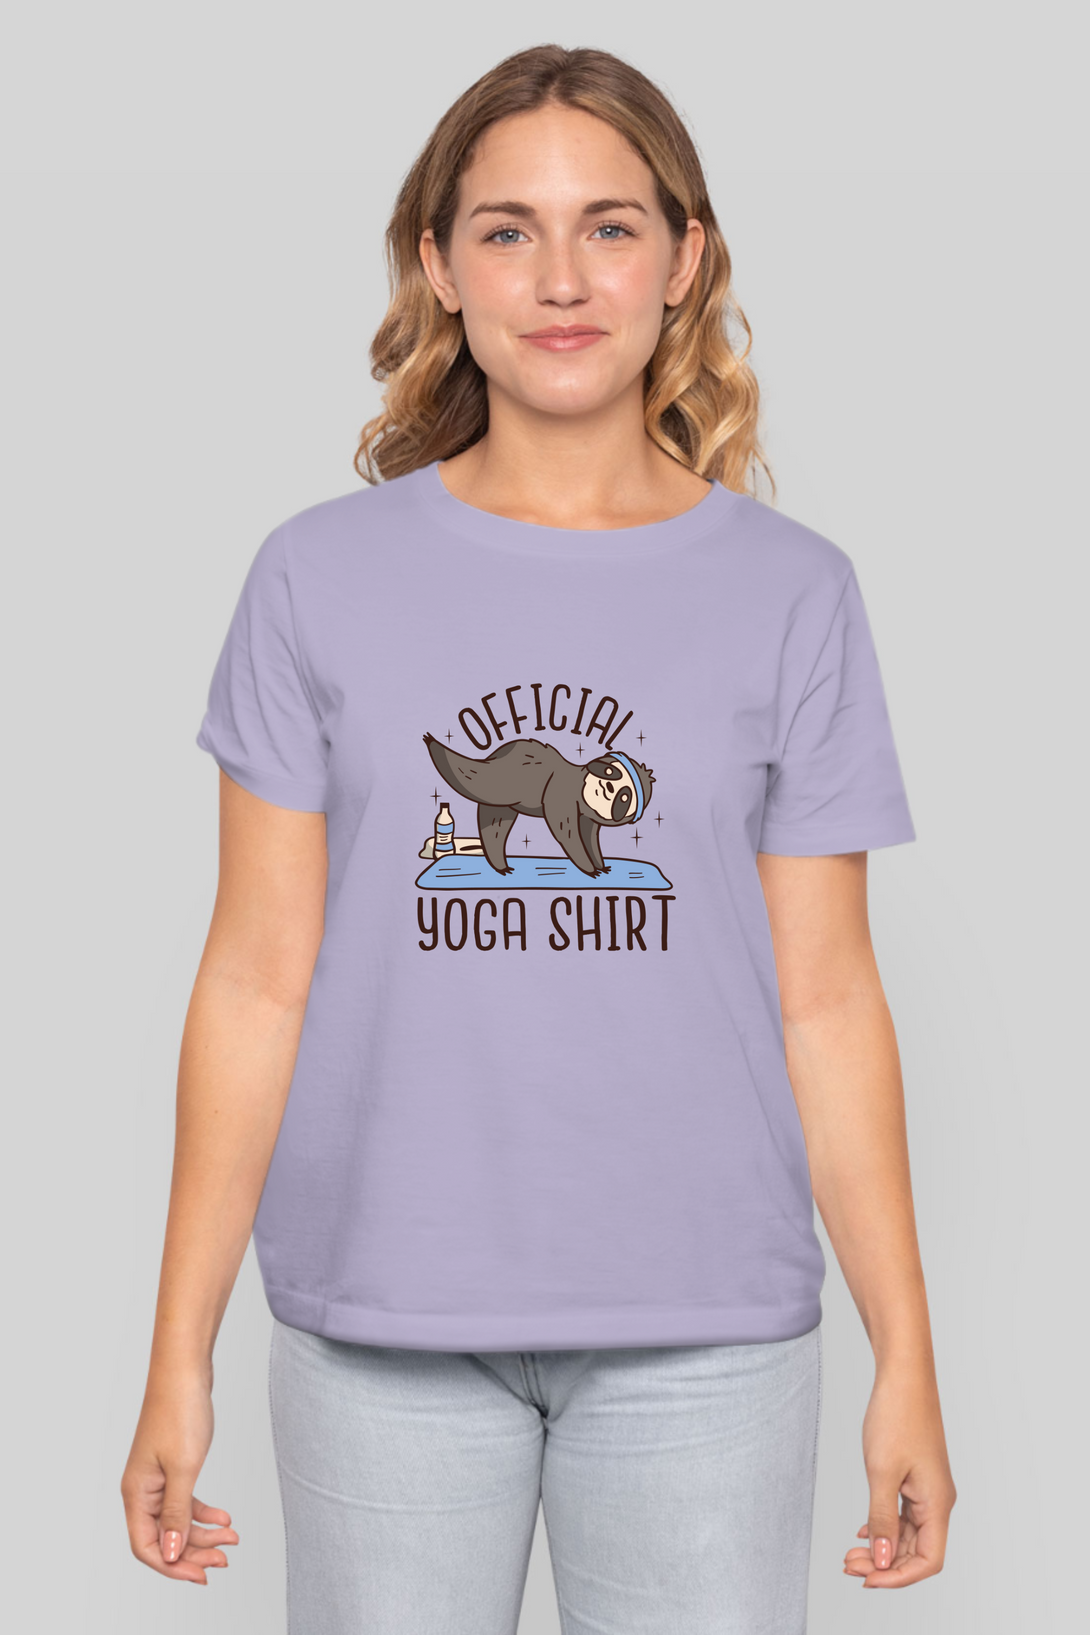 Official Yoga Sloth Printed T-Shirt For Women - WowWaves - 16